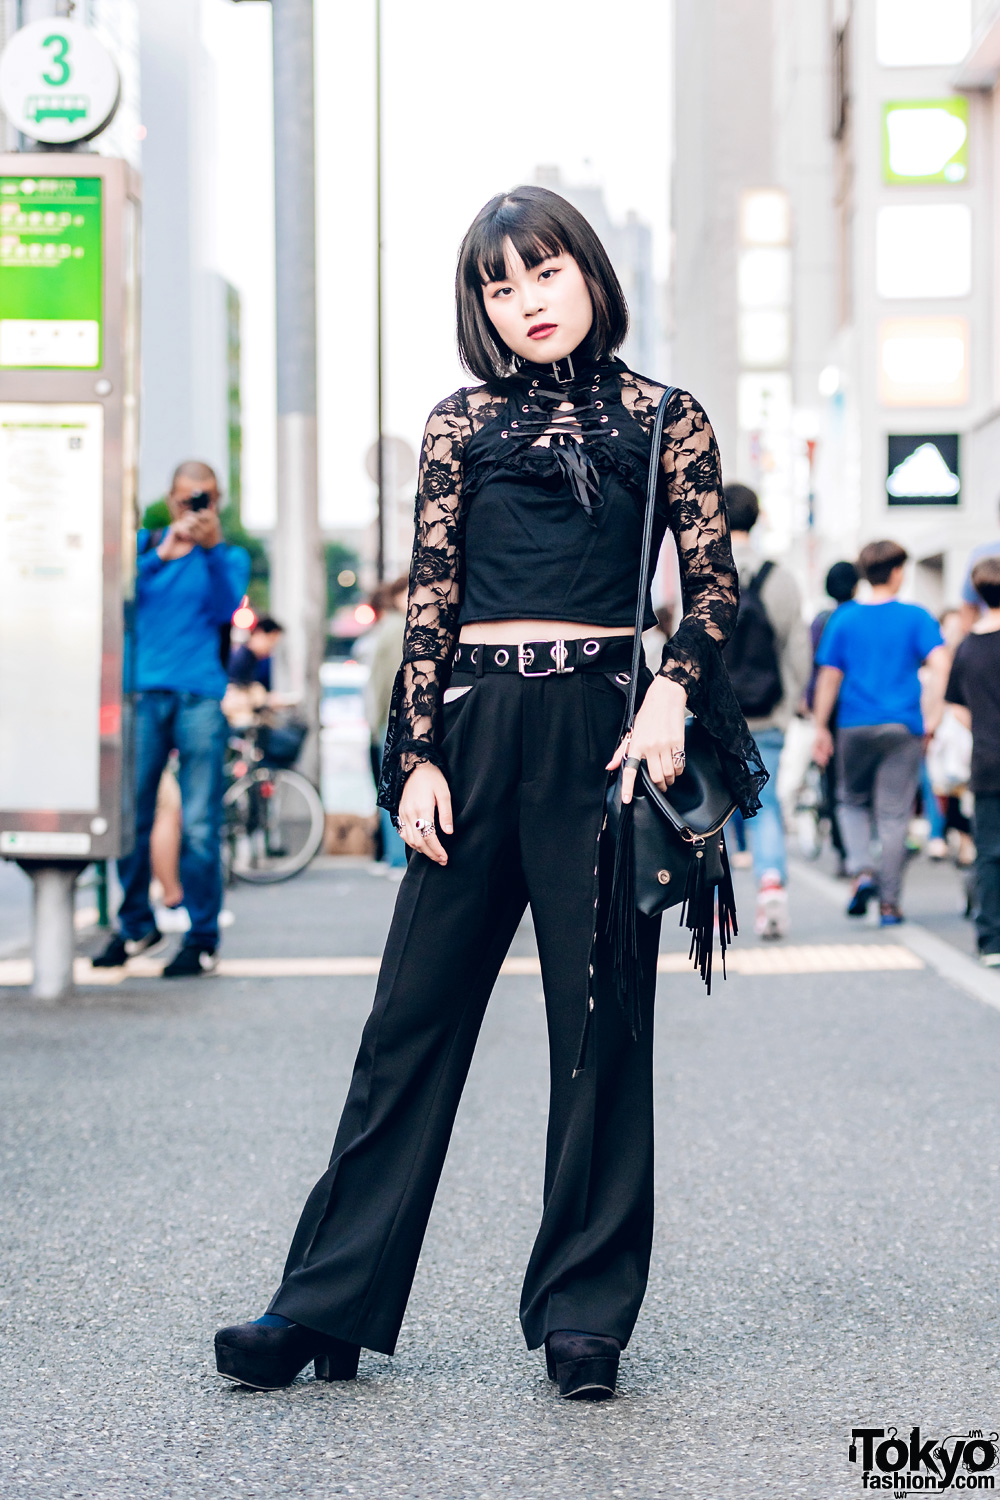 All-Black Street Style w/ Floral Lace Top, Wide-Legged Pants & Suede Platform Shoes